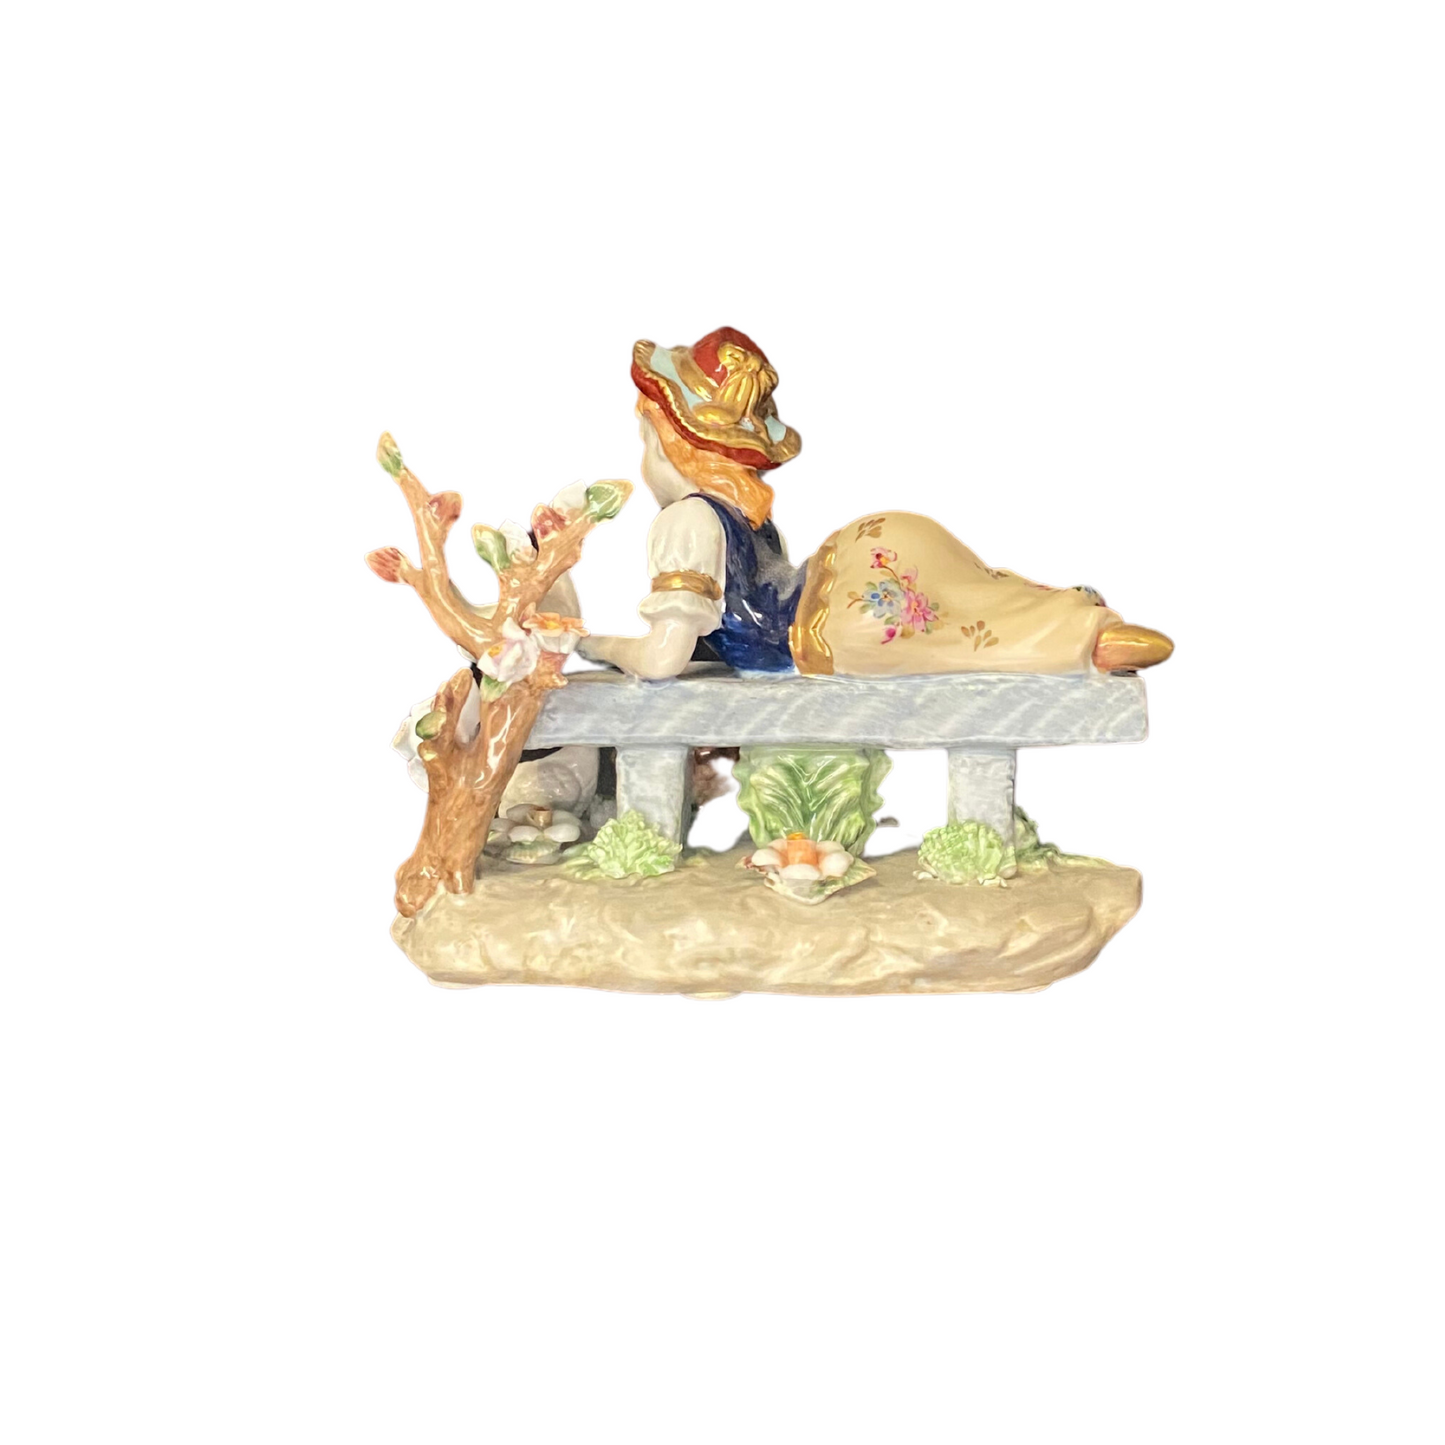 Rococo Style Child At Play Porcelain Figurine